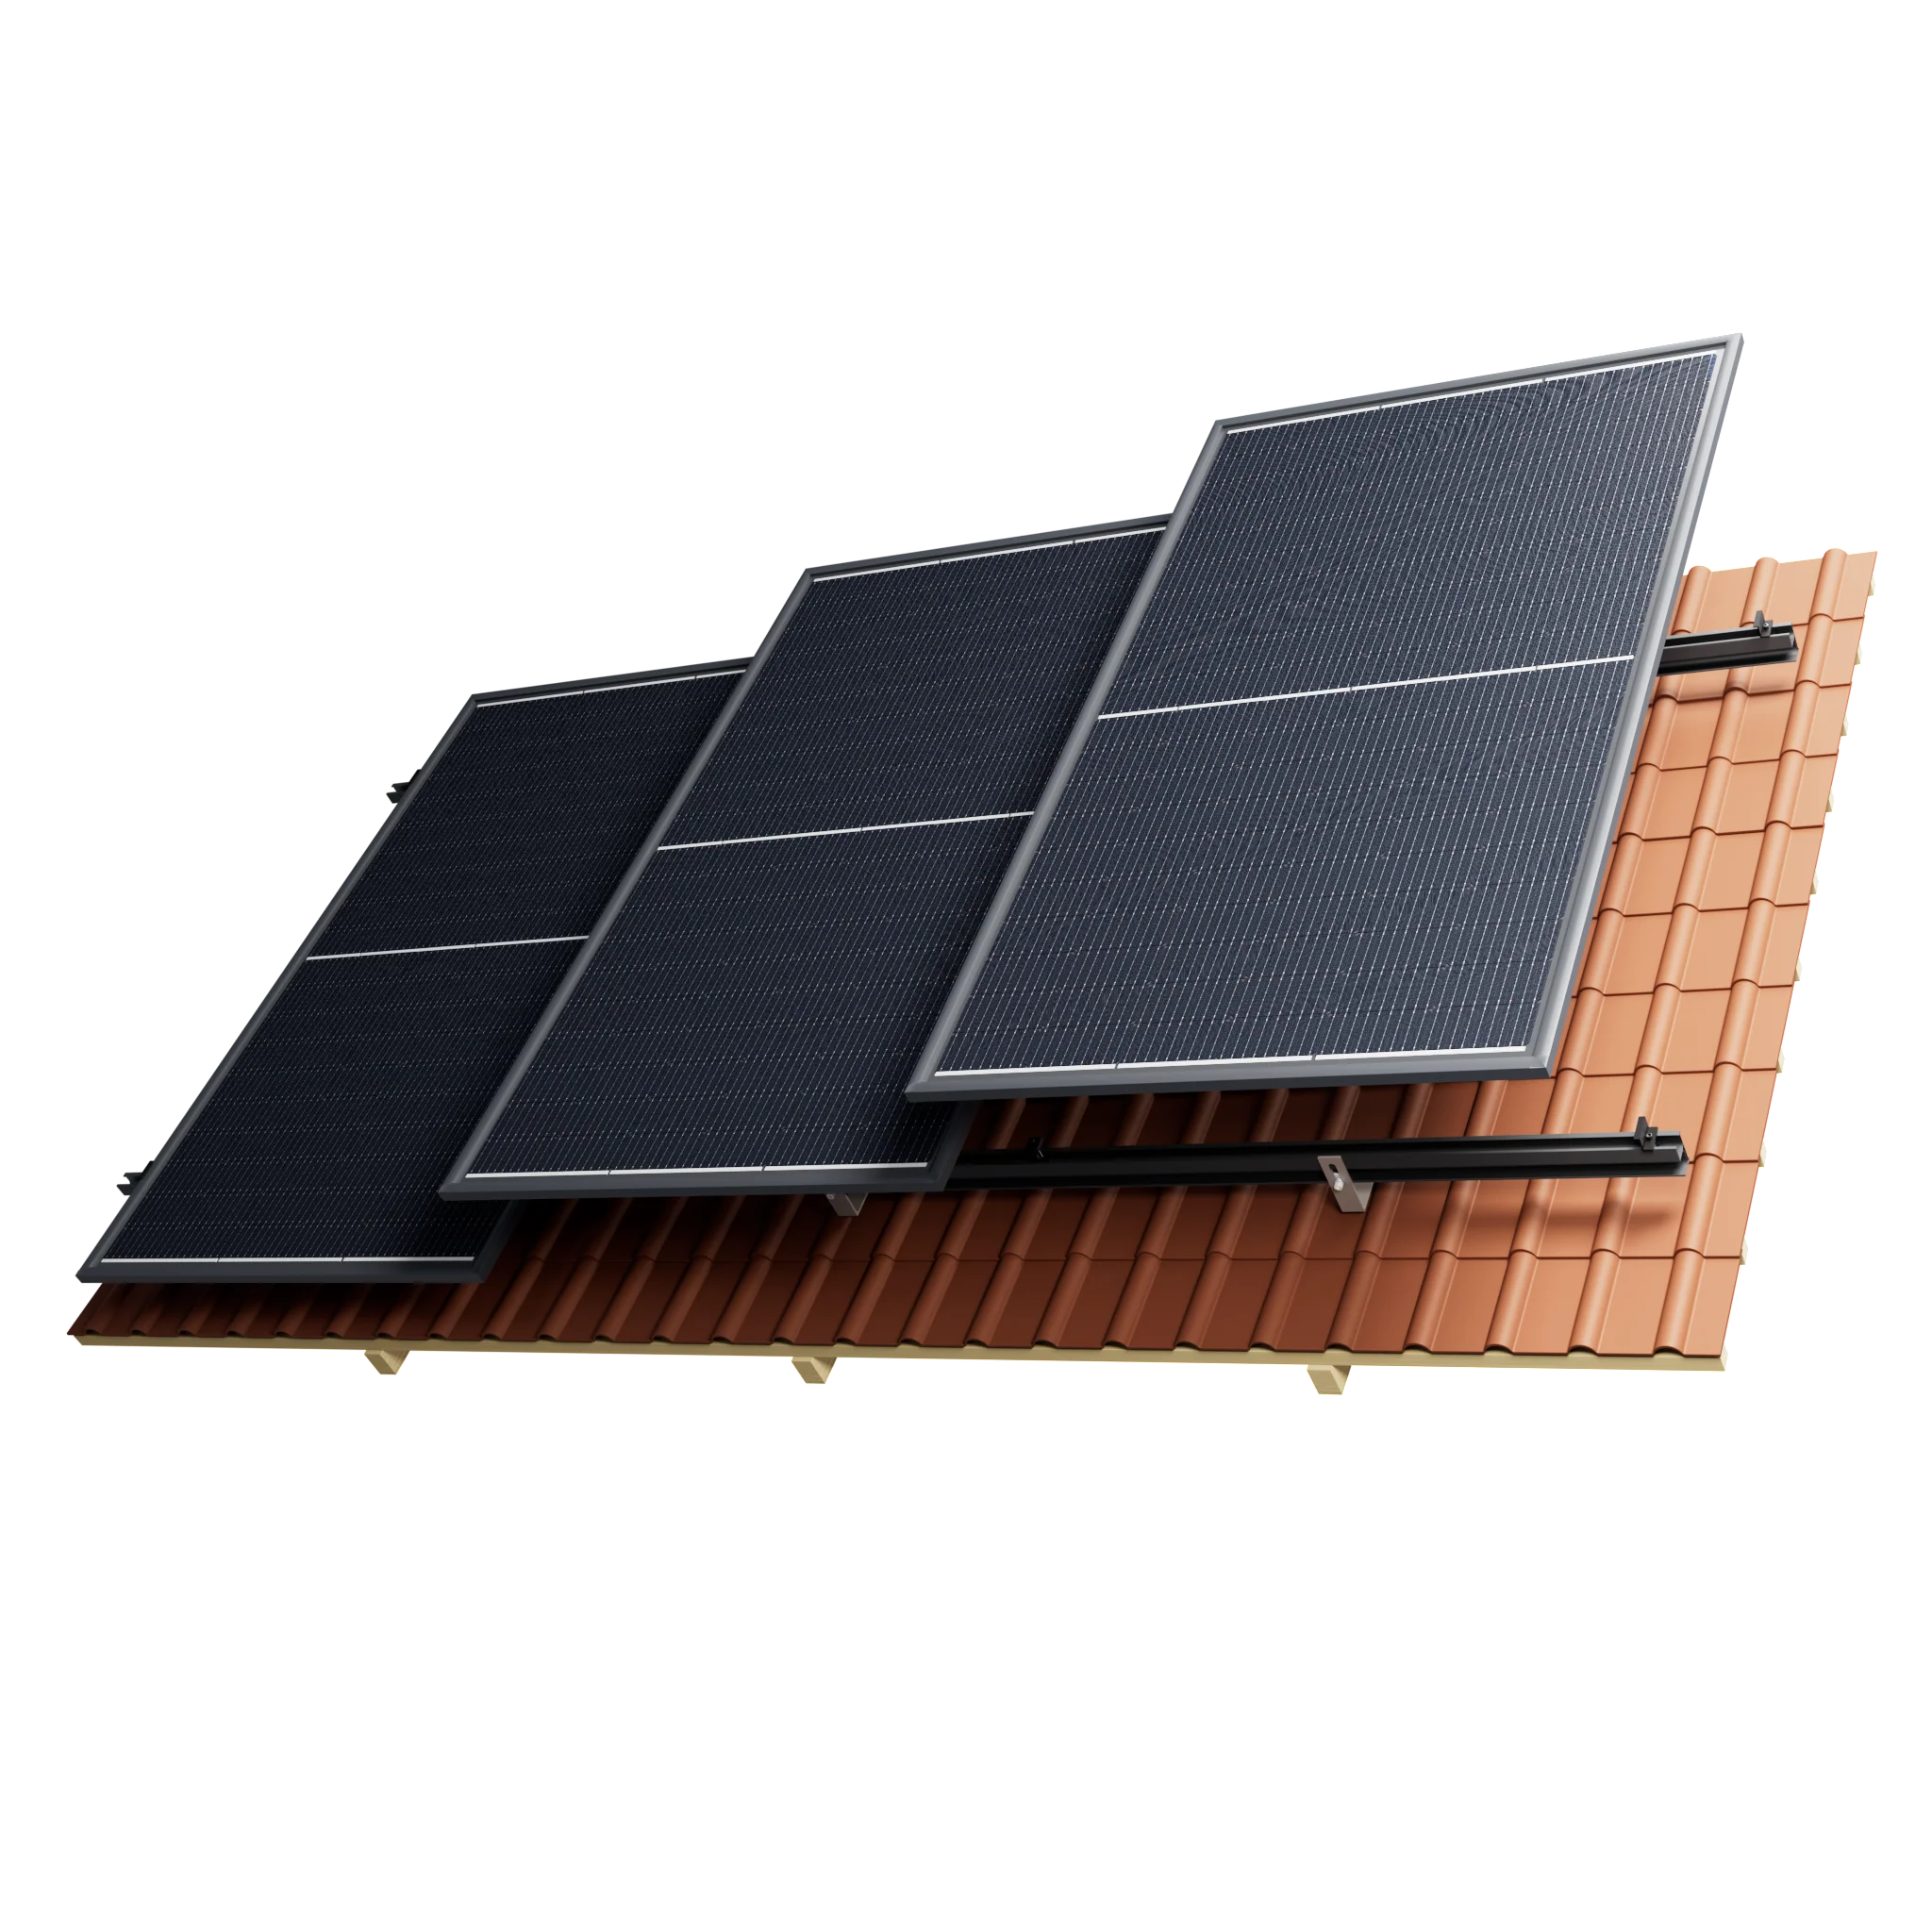 1_37kw_solar_roof_panel_pack.